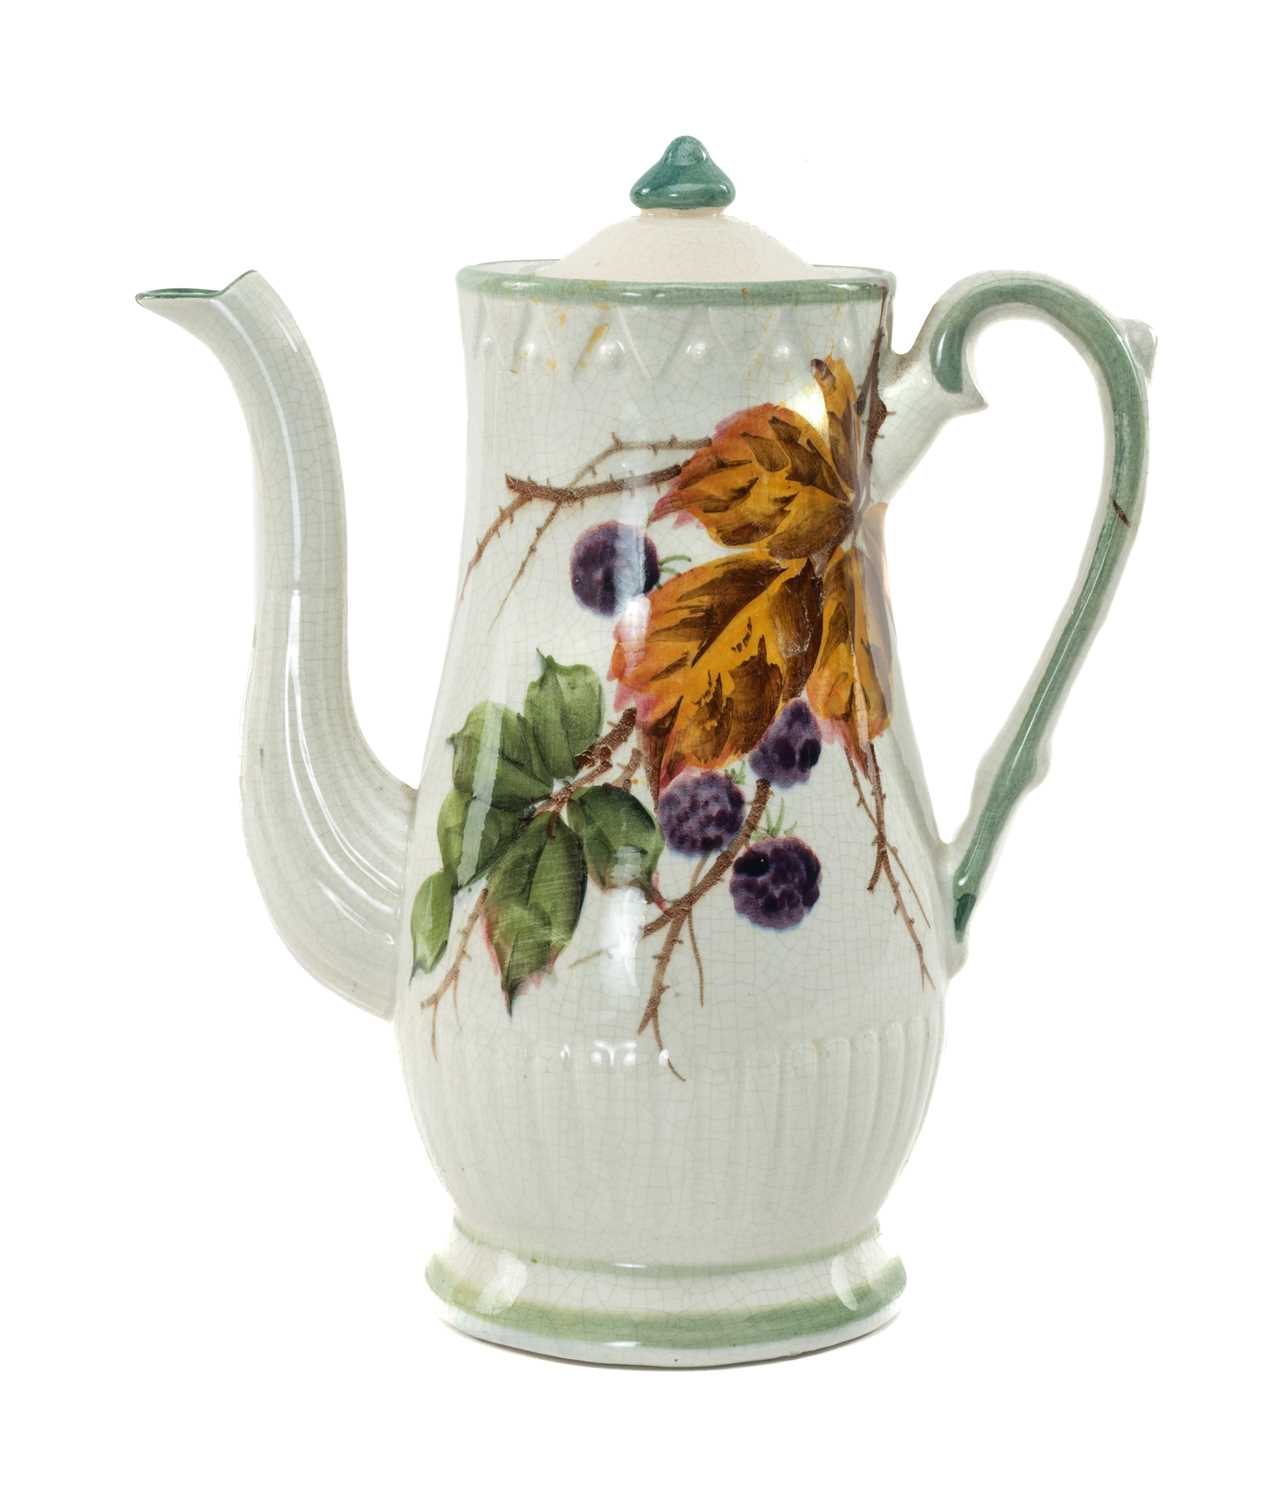 RARE LLANELLY POTTERY COFFEE POT & COVER circa 1910, painted in the 'Blackberry' pattern with